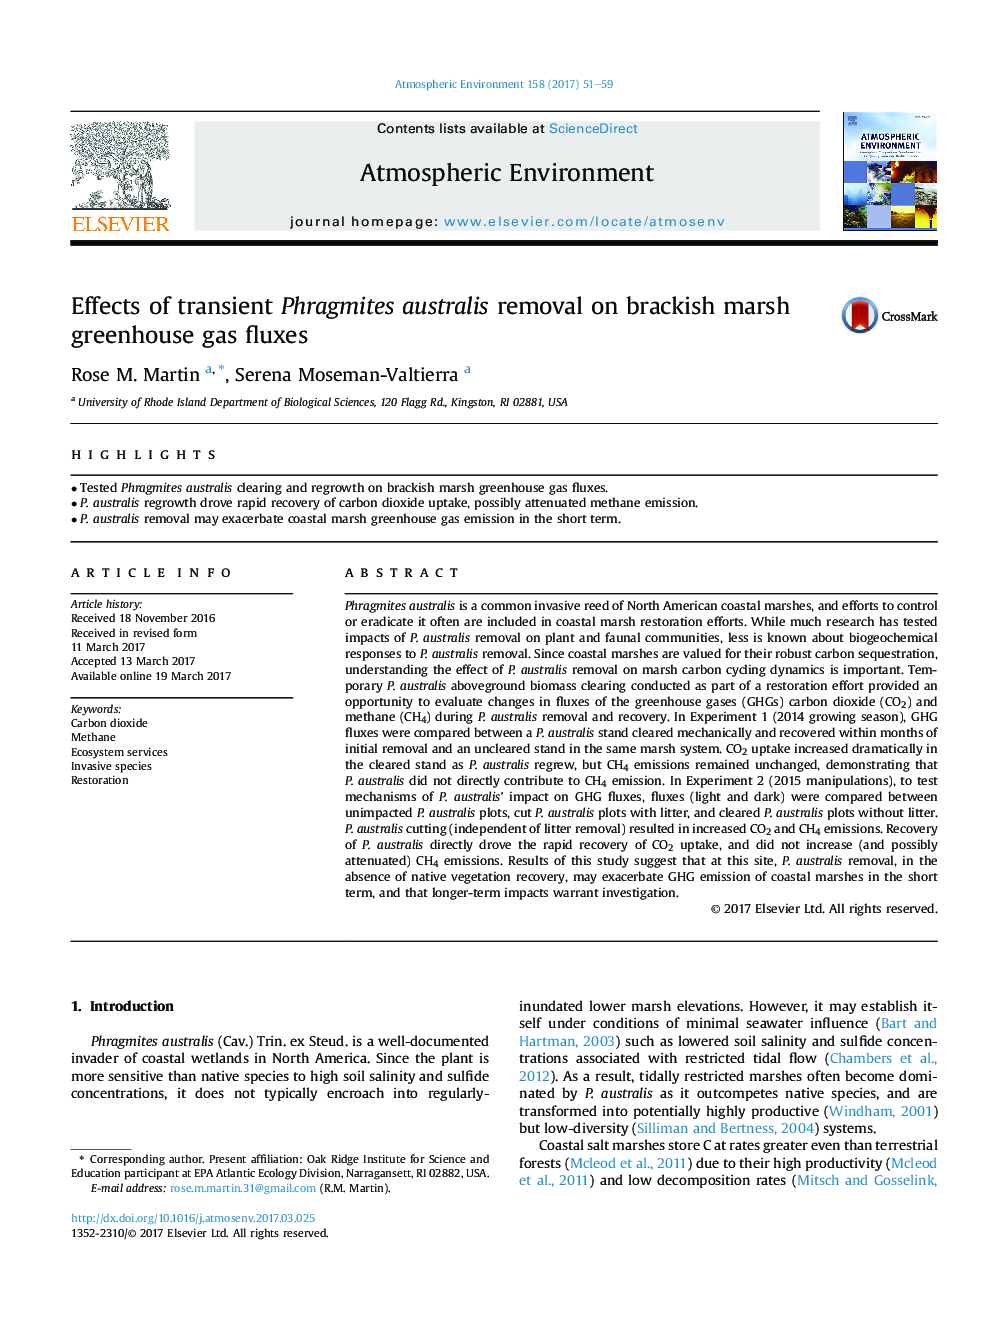 Effects of transient Phragmites australis removal on brackish marsh greenhouse gas fluxes